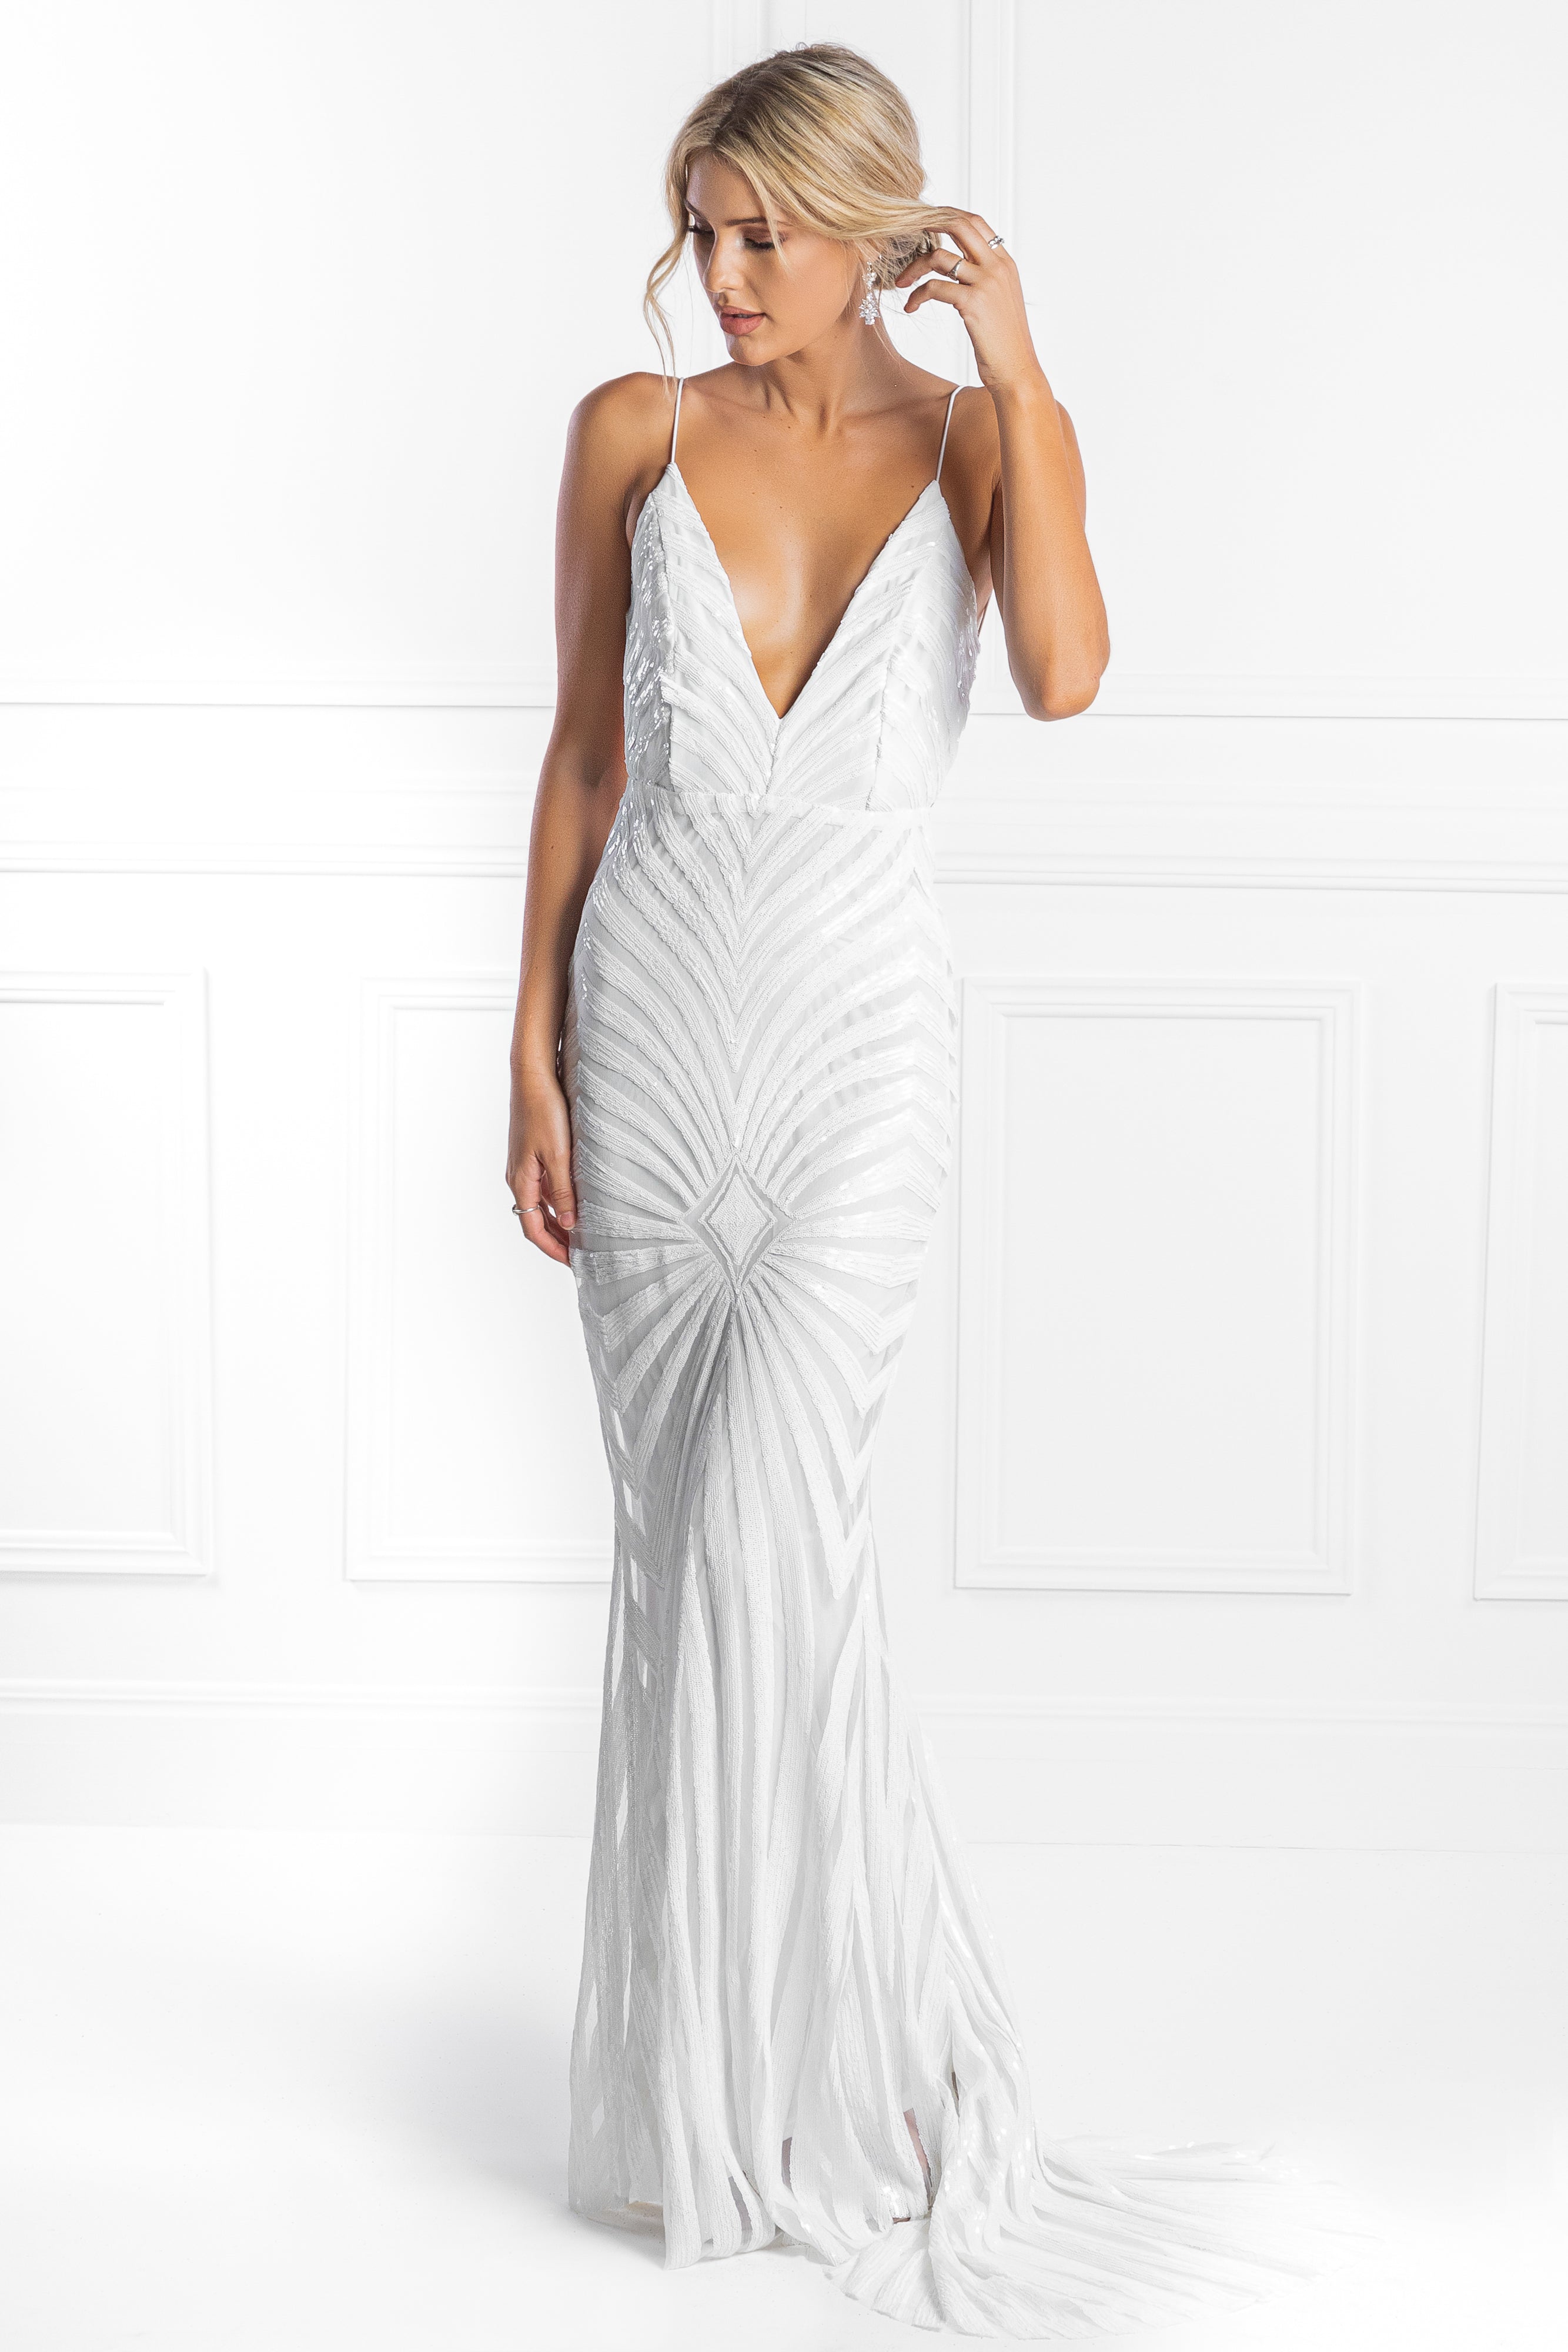 Honey Couture TILDA White Low Back Sequin Mermaid Formal Gown Dress {vendor} AfterPay Humm ZipPay LayBuy Sezzle